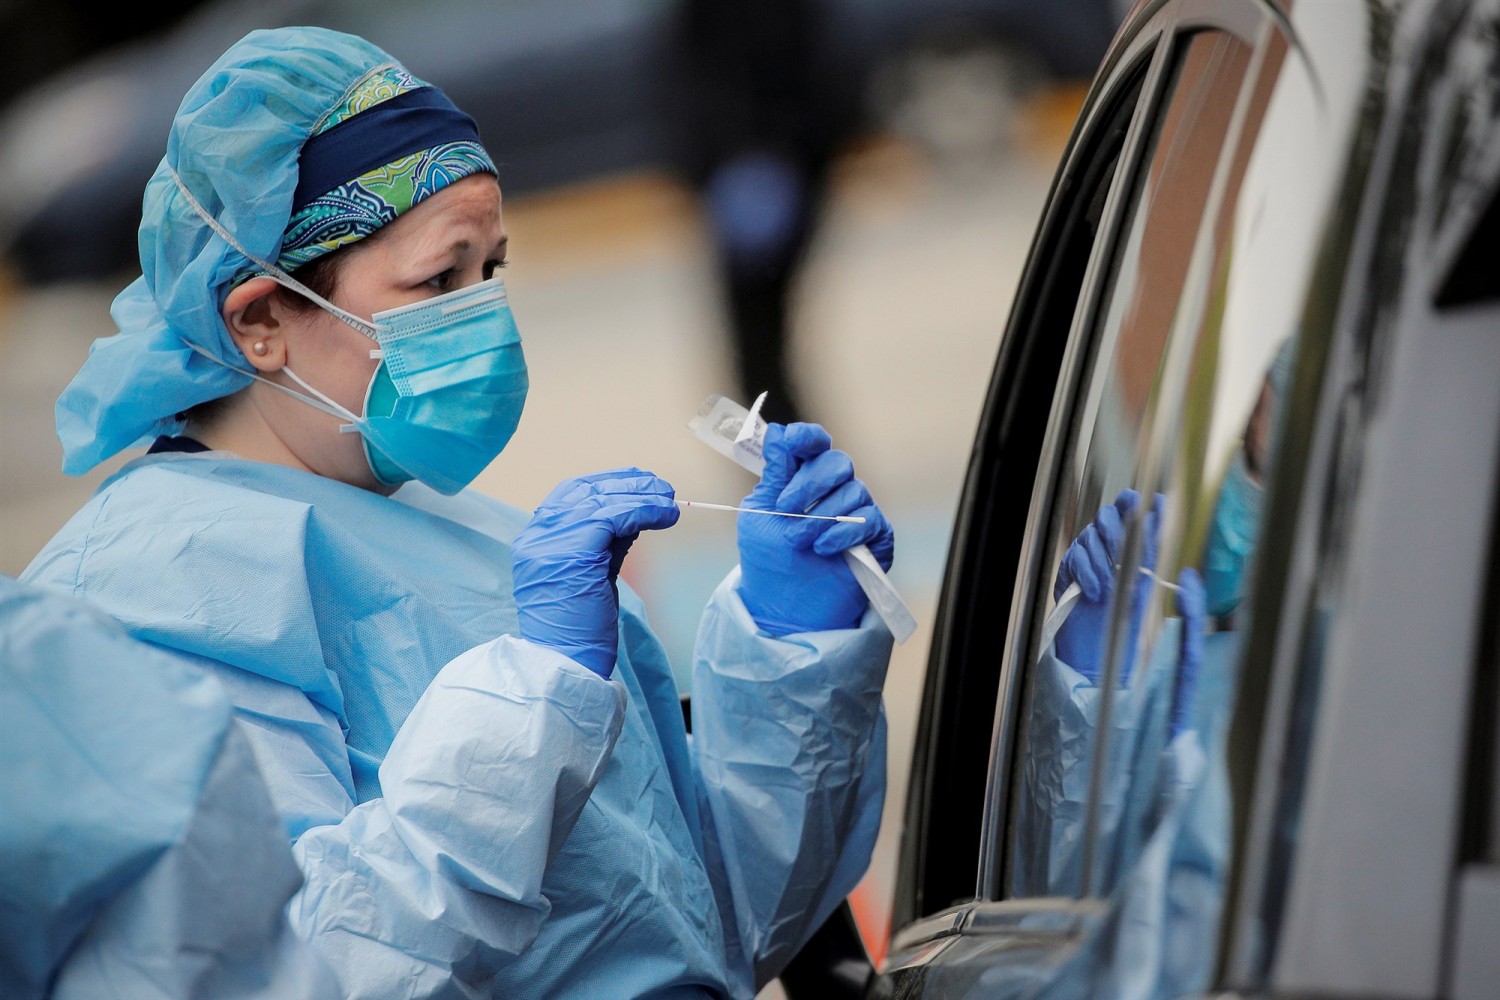 Image: Nurses work at a drive-thru testing site for the coronavirus disease (COVID-19) at North Shore University Hospital in Manhasset, New YorkNurses work at a drive-thru testing site for COVID-19 at North Shore University Hospital in Manhas